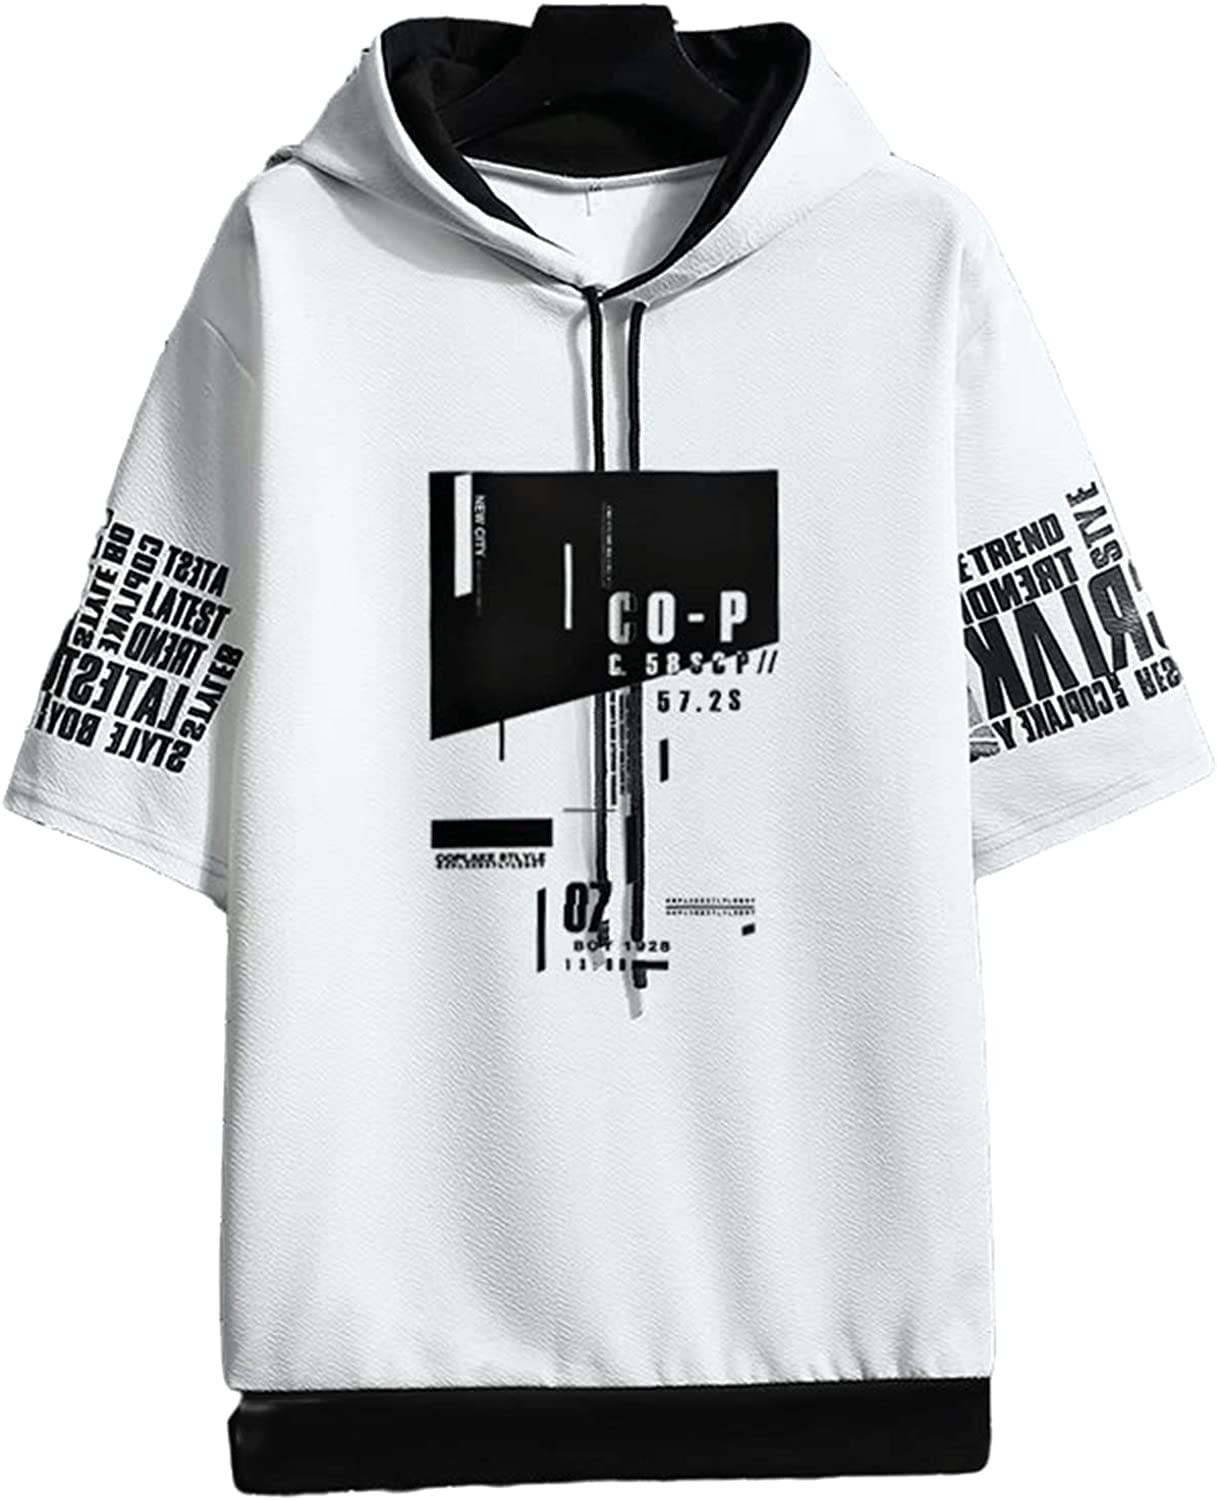 Abstract Man Dreamscape T-Shirt Unique And Artistic Graphic Tee Creative  Style Y2k Streetwear Grunge Inspired Clothing Hoodie Classic - TourBandTees